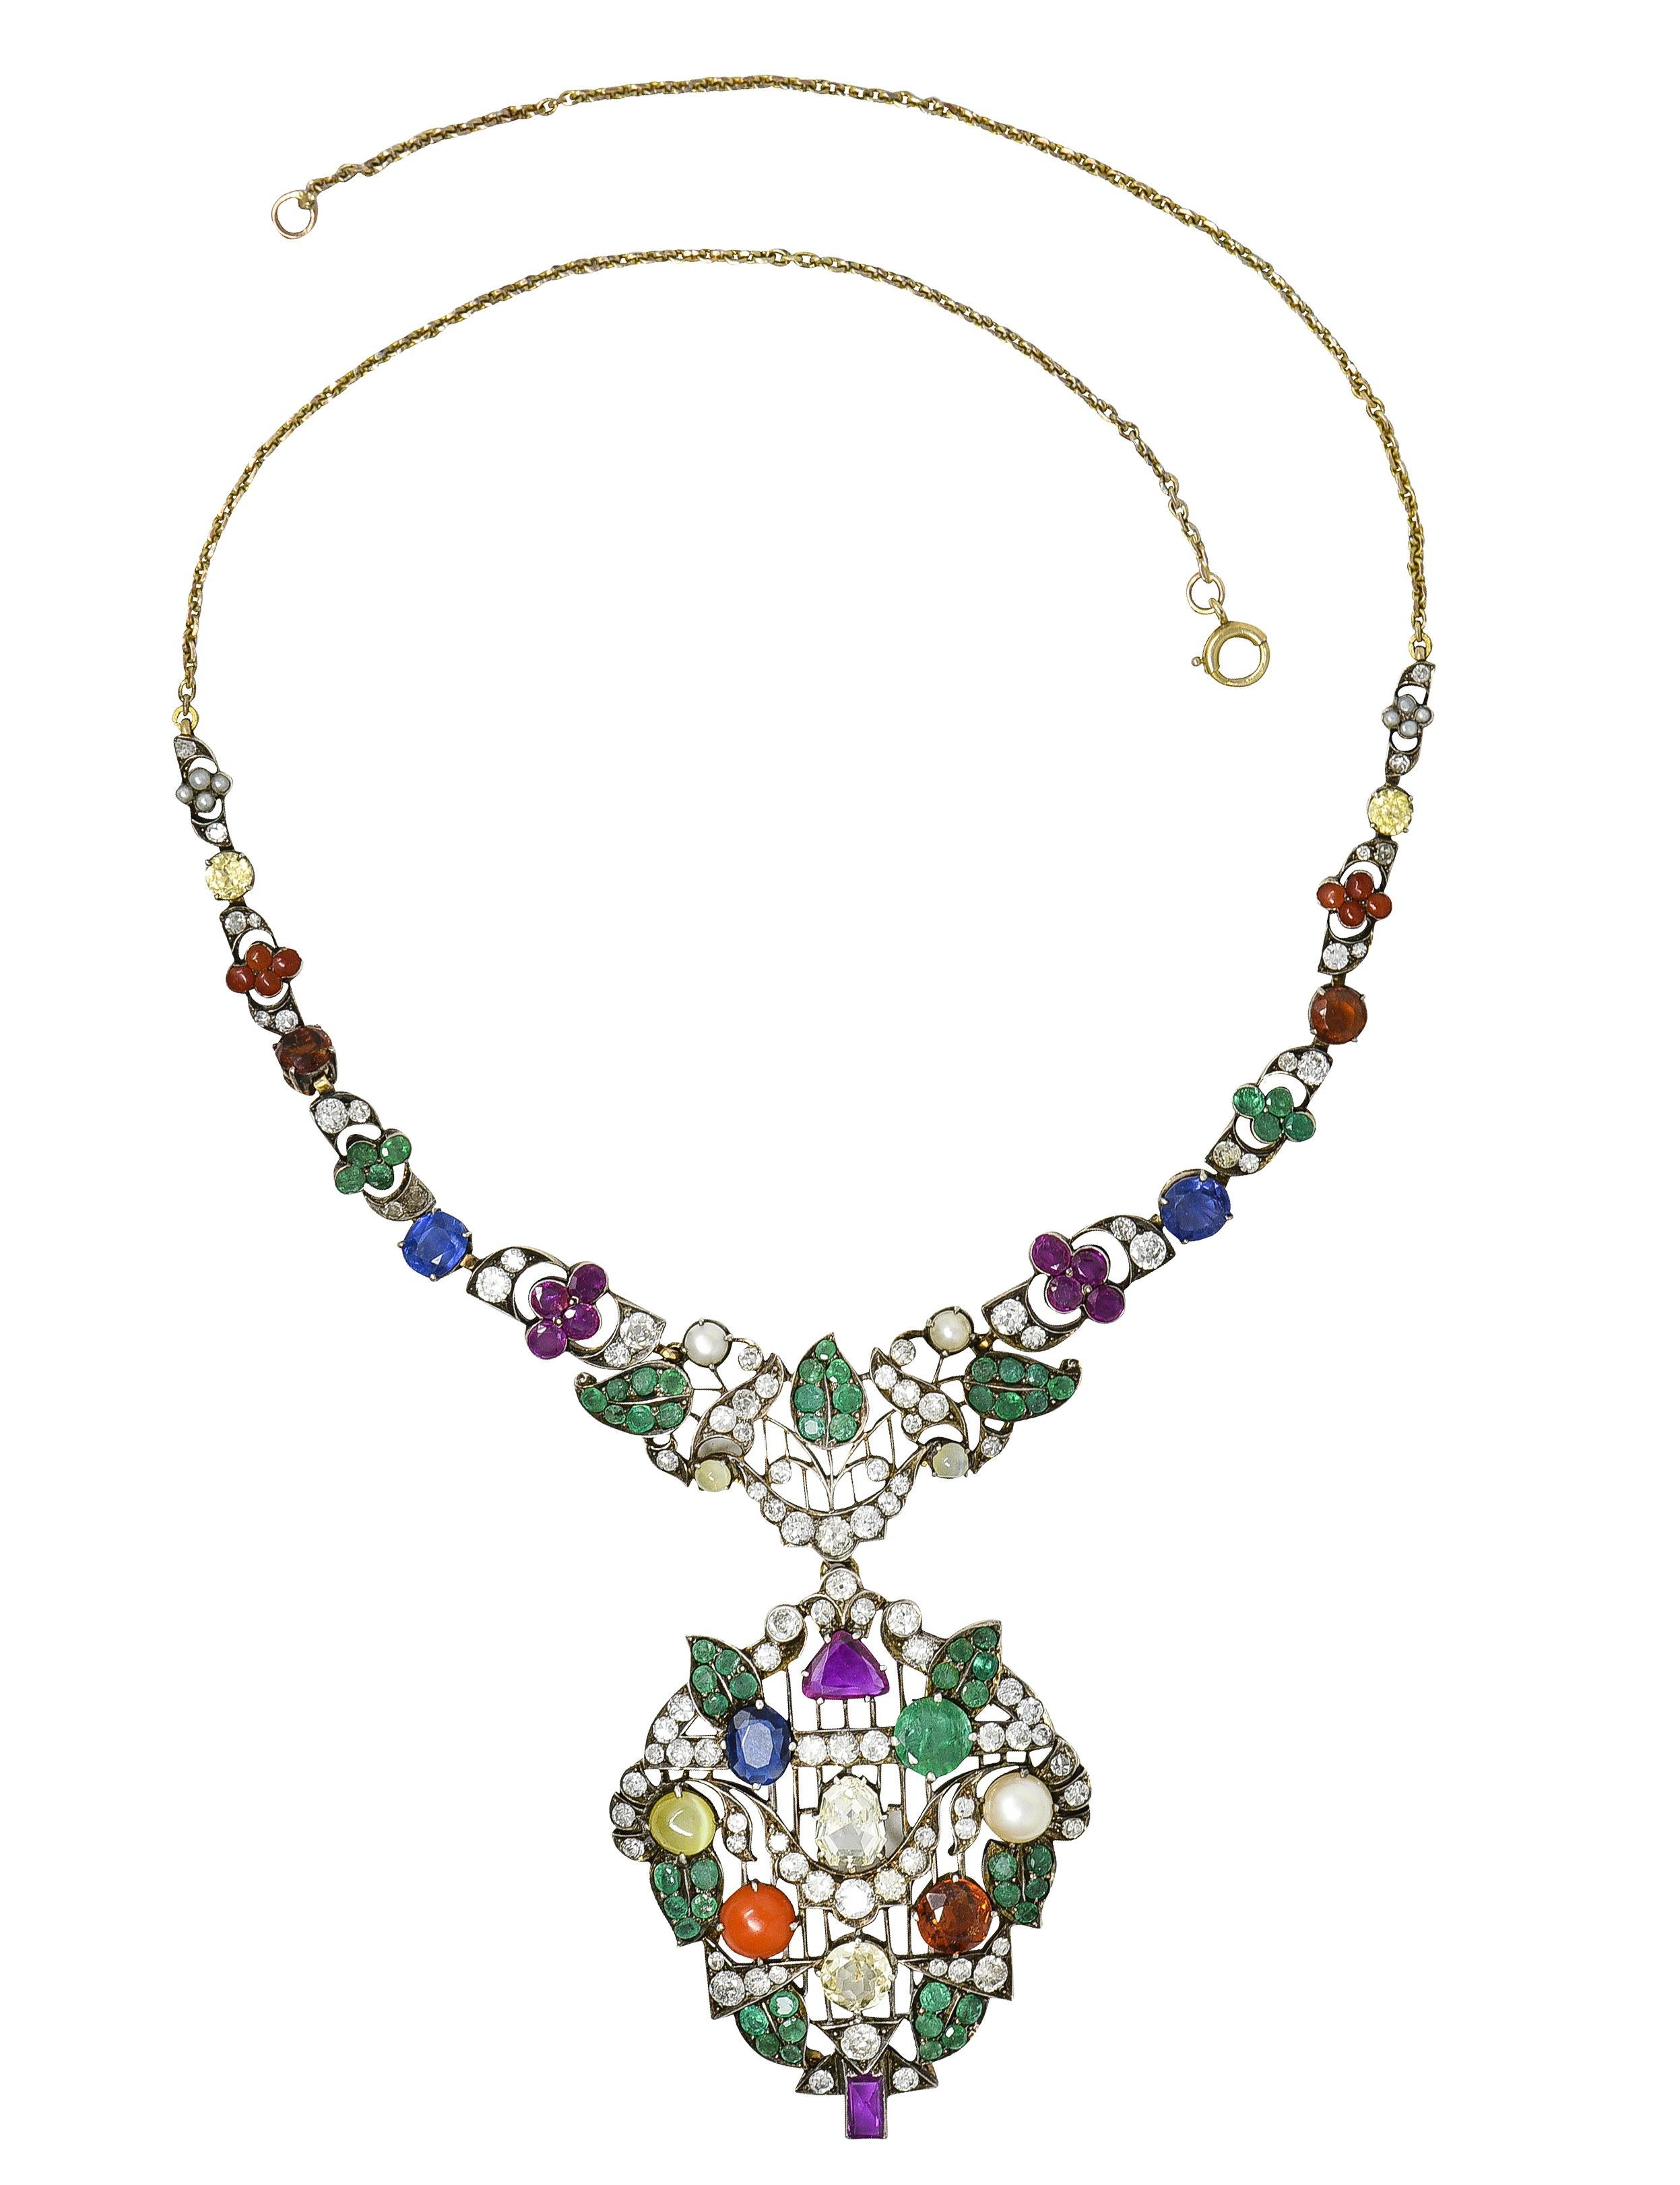 Necklace is designed as a garland style necklace with knife edge striation, scrolling foliate, and clustered gemstones. Leaves are set with round cut emeralds weighing approximately 3.55 carats total - translucent bluish green. With clustered round